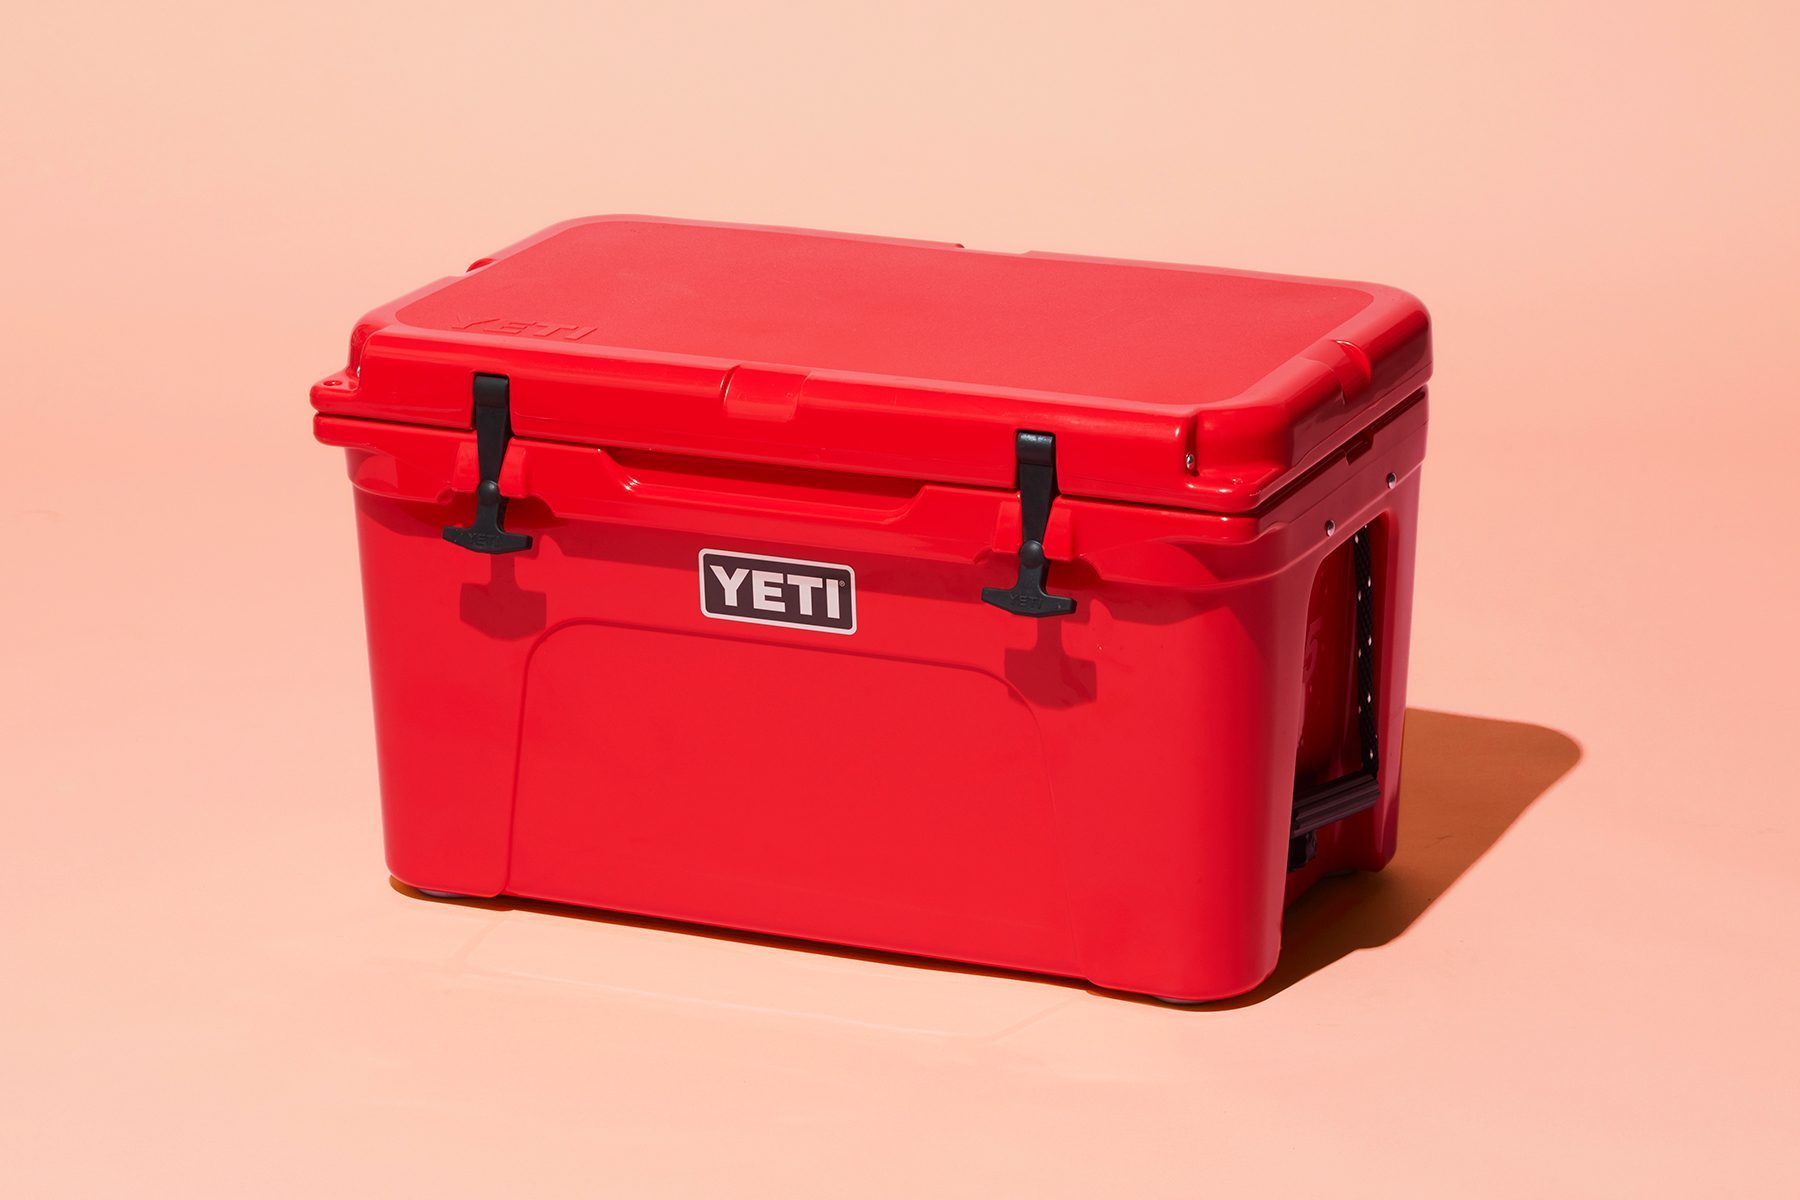 Yeti Cooler Review Toh Ptt Coolers 062624 Ef Yeti